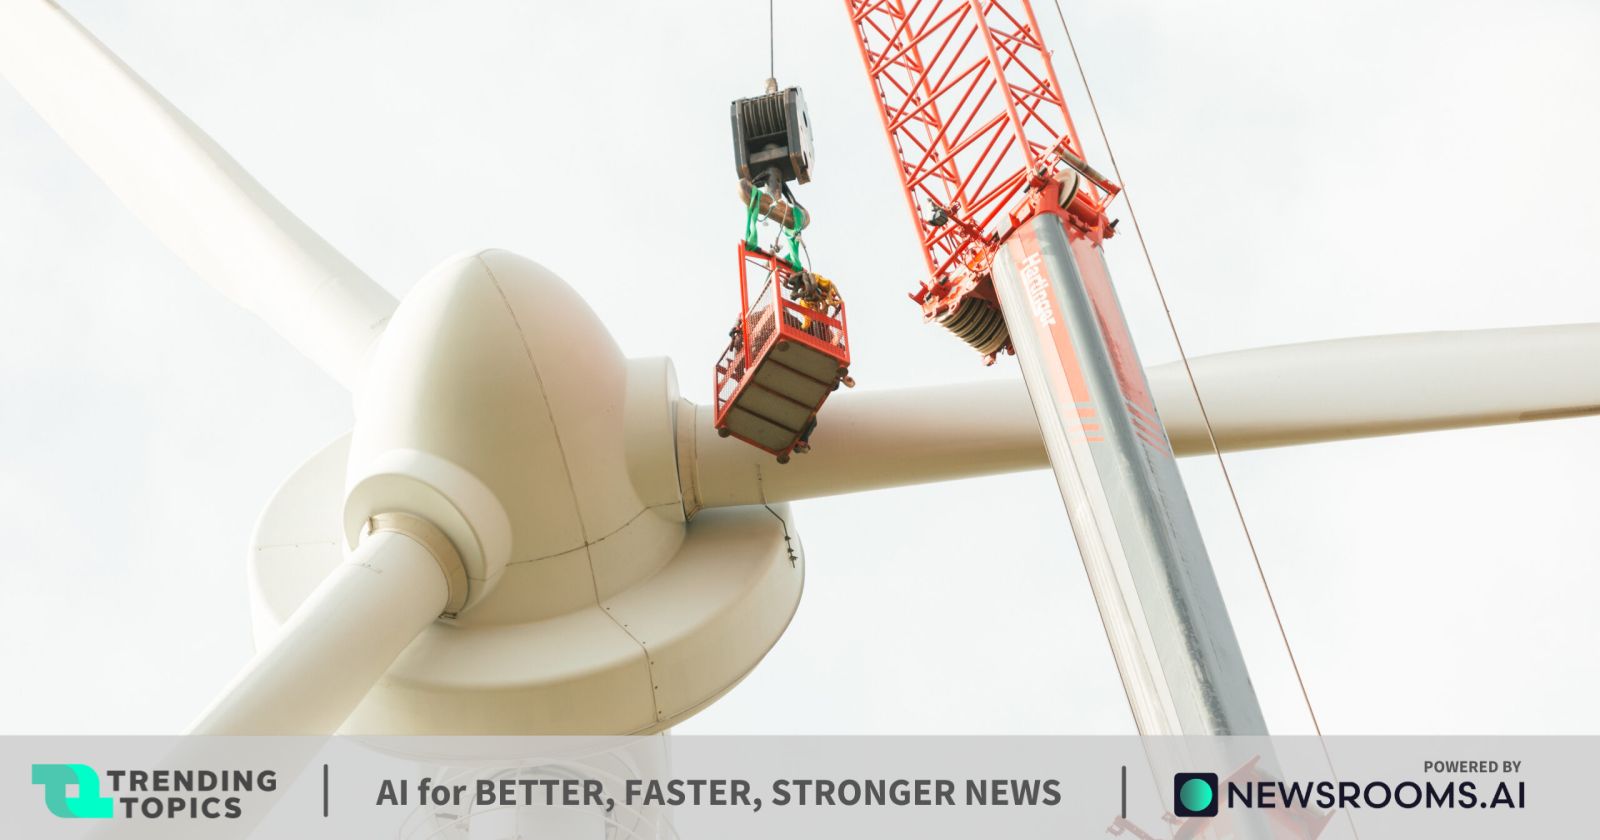 CleanTech startup produces wind turbine with wooden blades